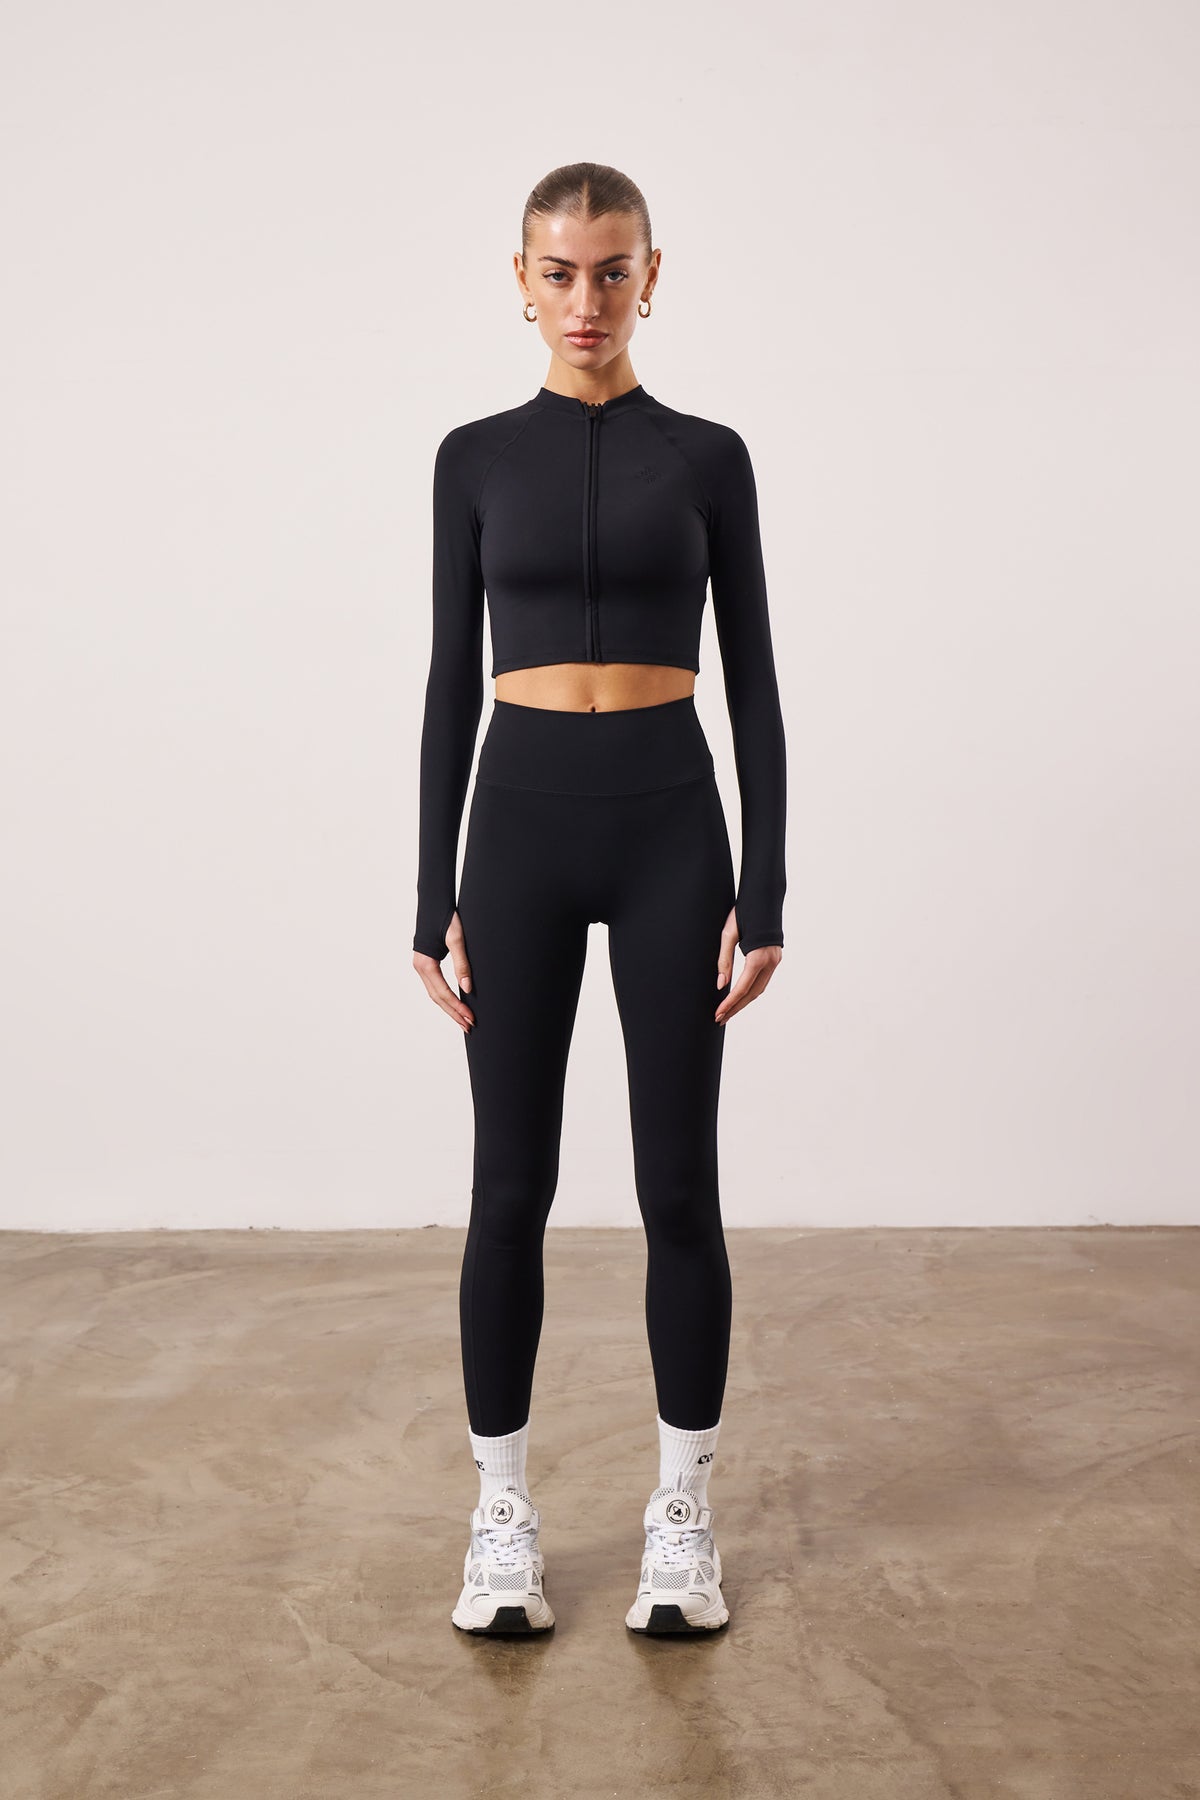 EMBLEM SOFT TOUCH JERSEY LEGGINGS - BLACK – The Couture Club